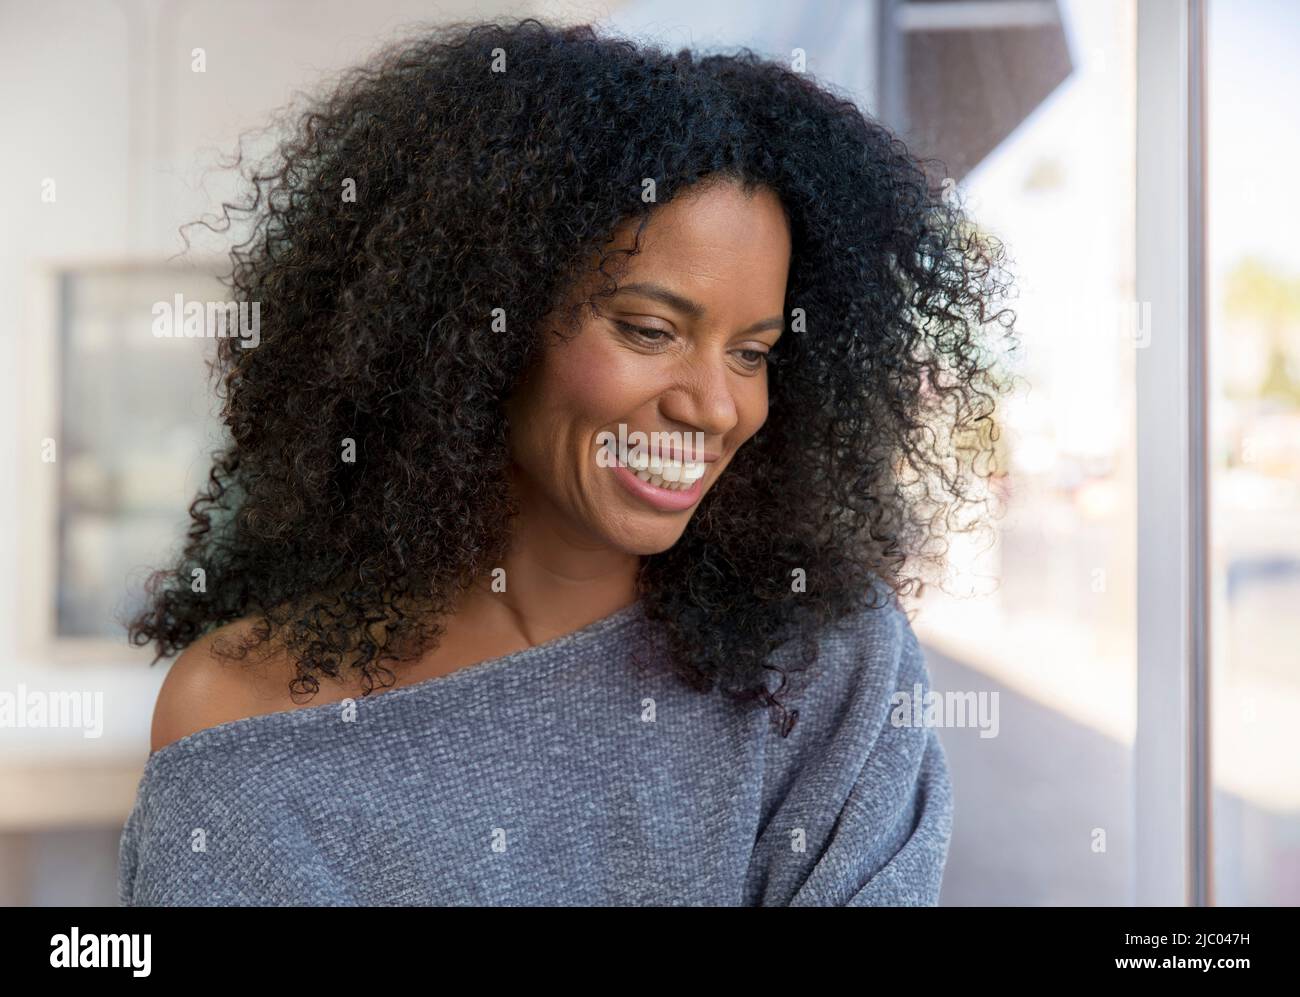 Mixed race, middle-aged woman with natural hair looking out window with a large smile. Stock Photo